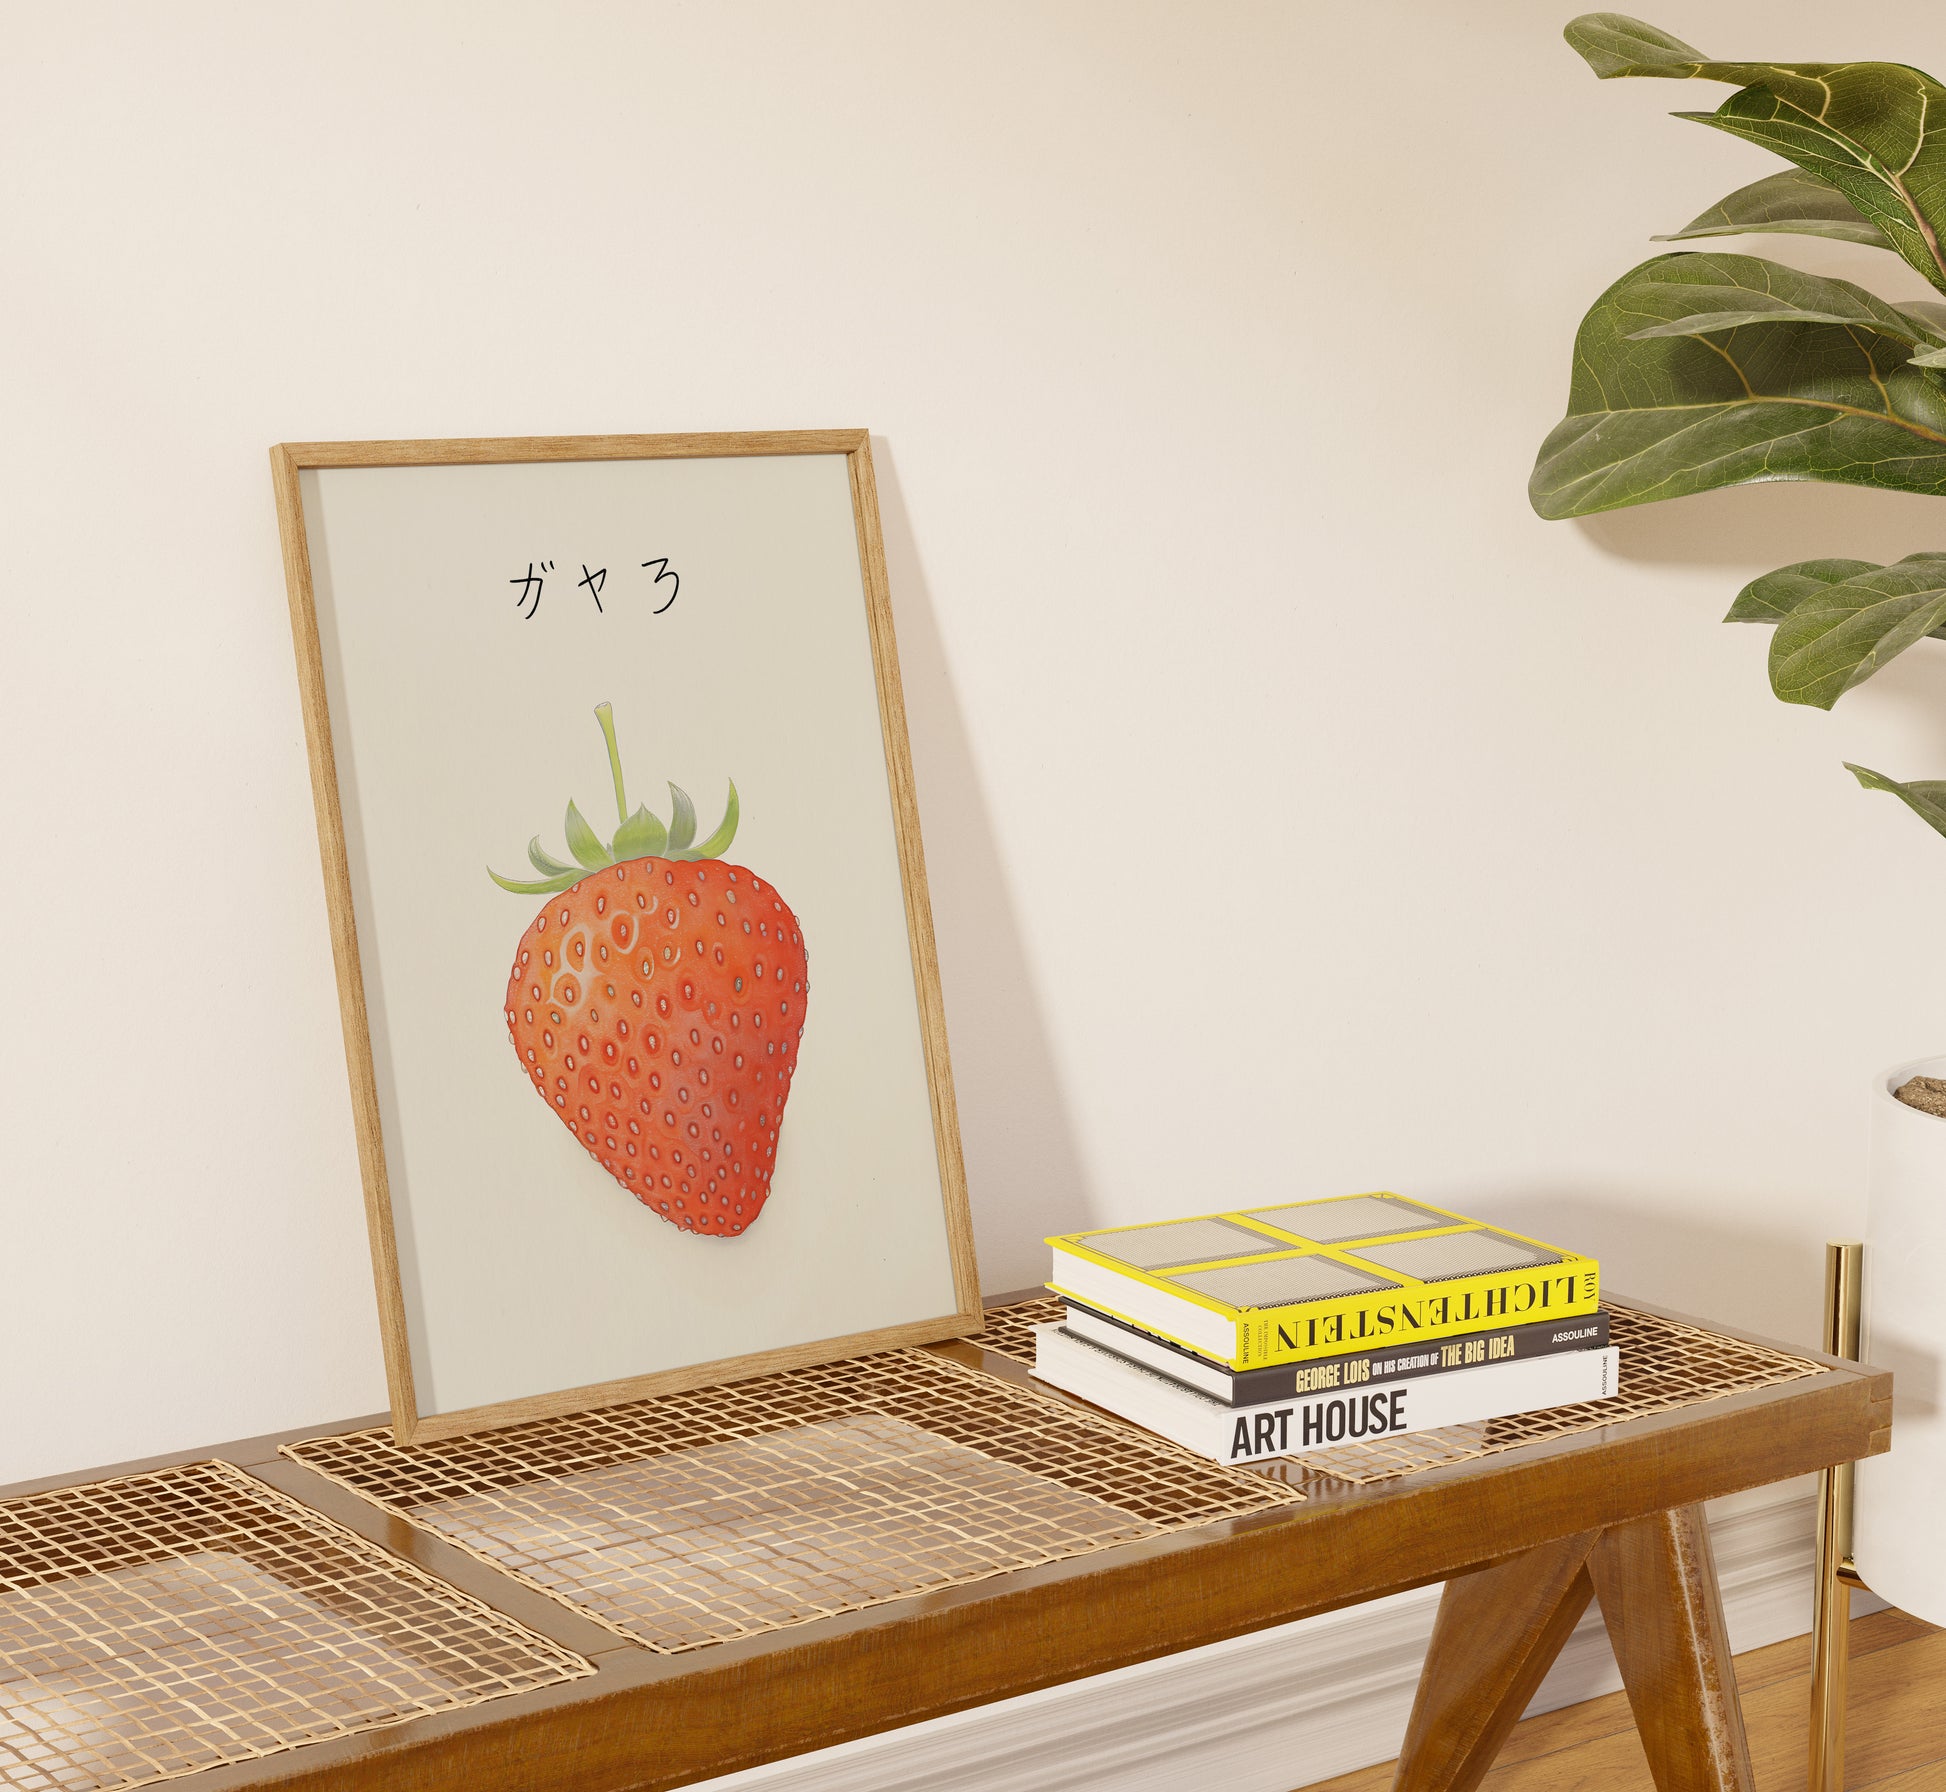 Framed artwork of a strawberry with Japanese text above, on a table beside books.